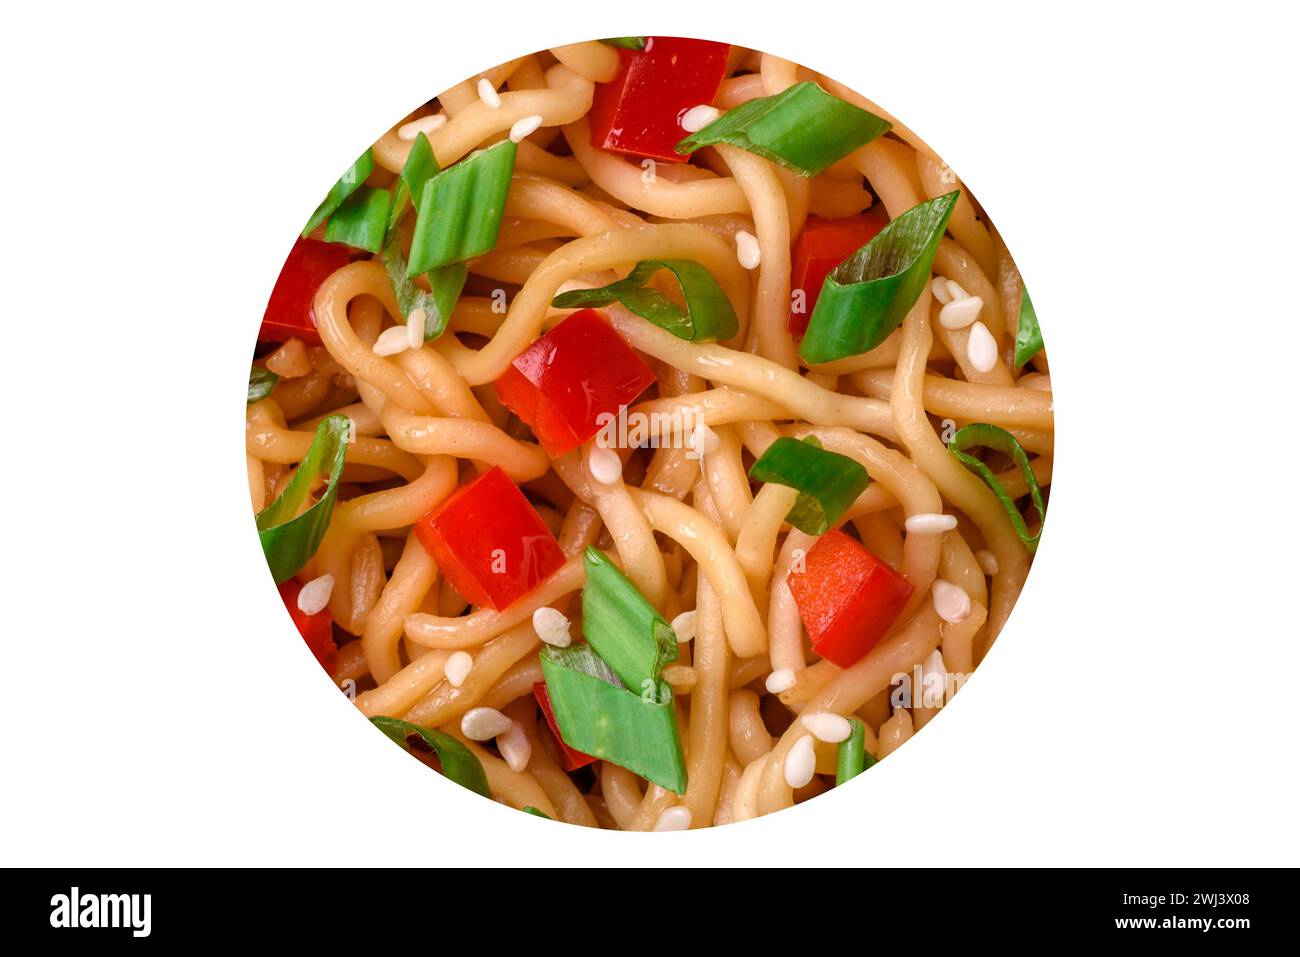 Delicious fresh Asian noodles with vegetables, salt, spices and herbs Stock Photo